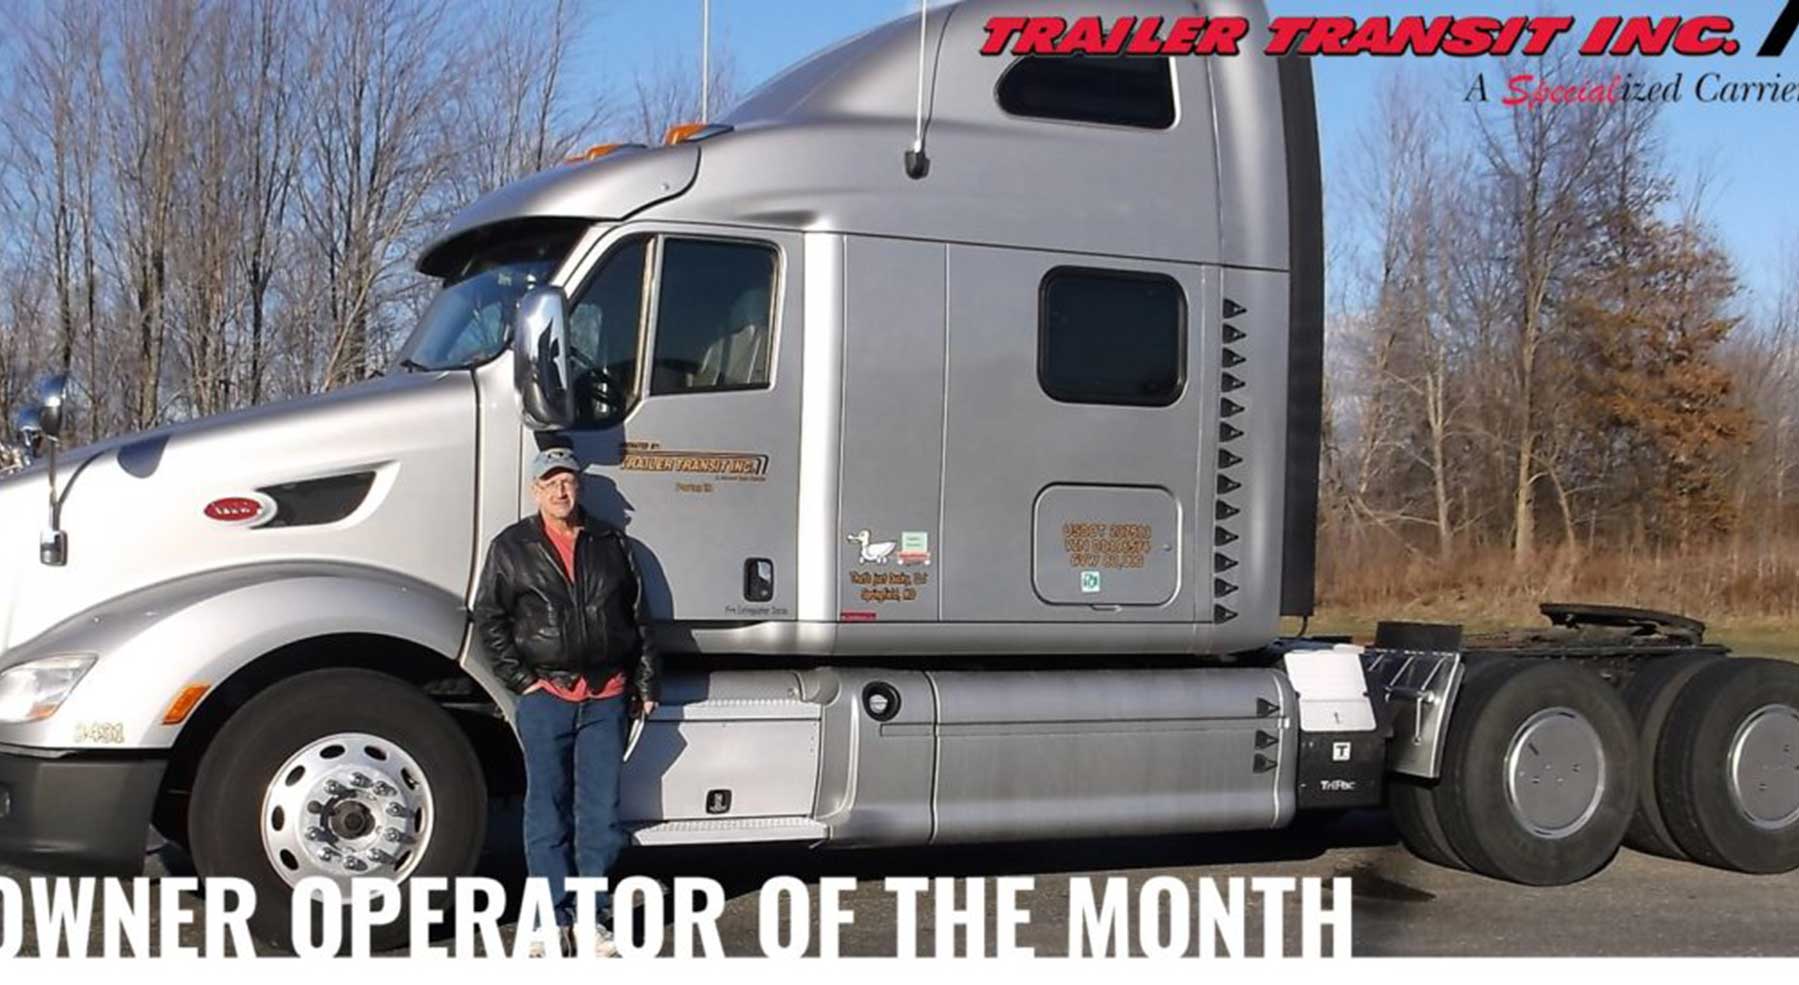 Trailer Transit Inc. Owner Operator of the Month December 2017